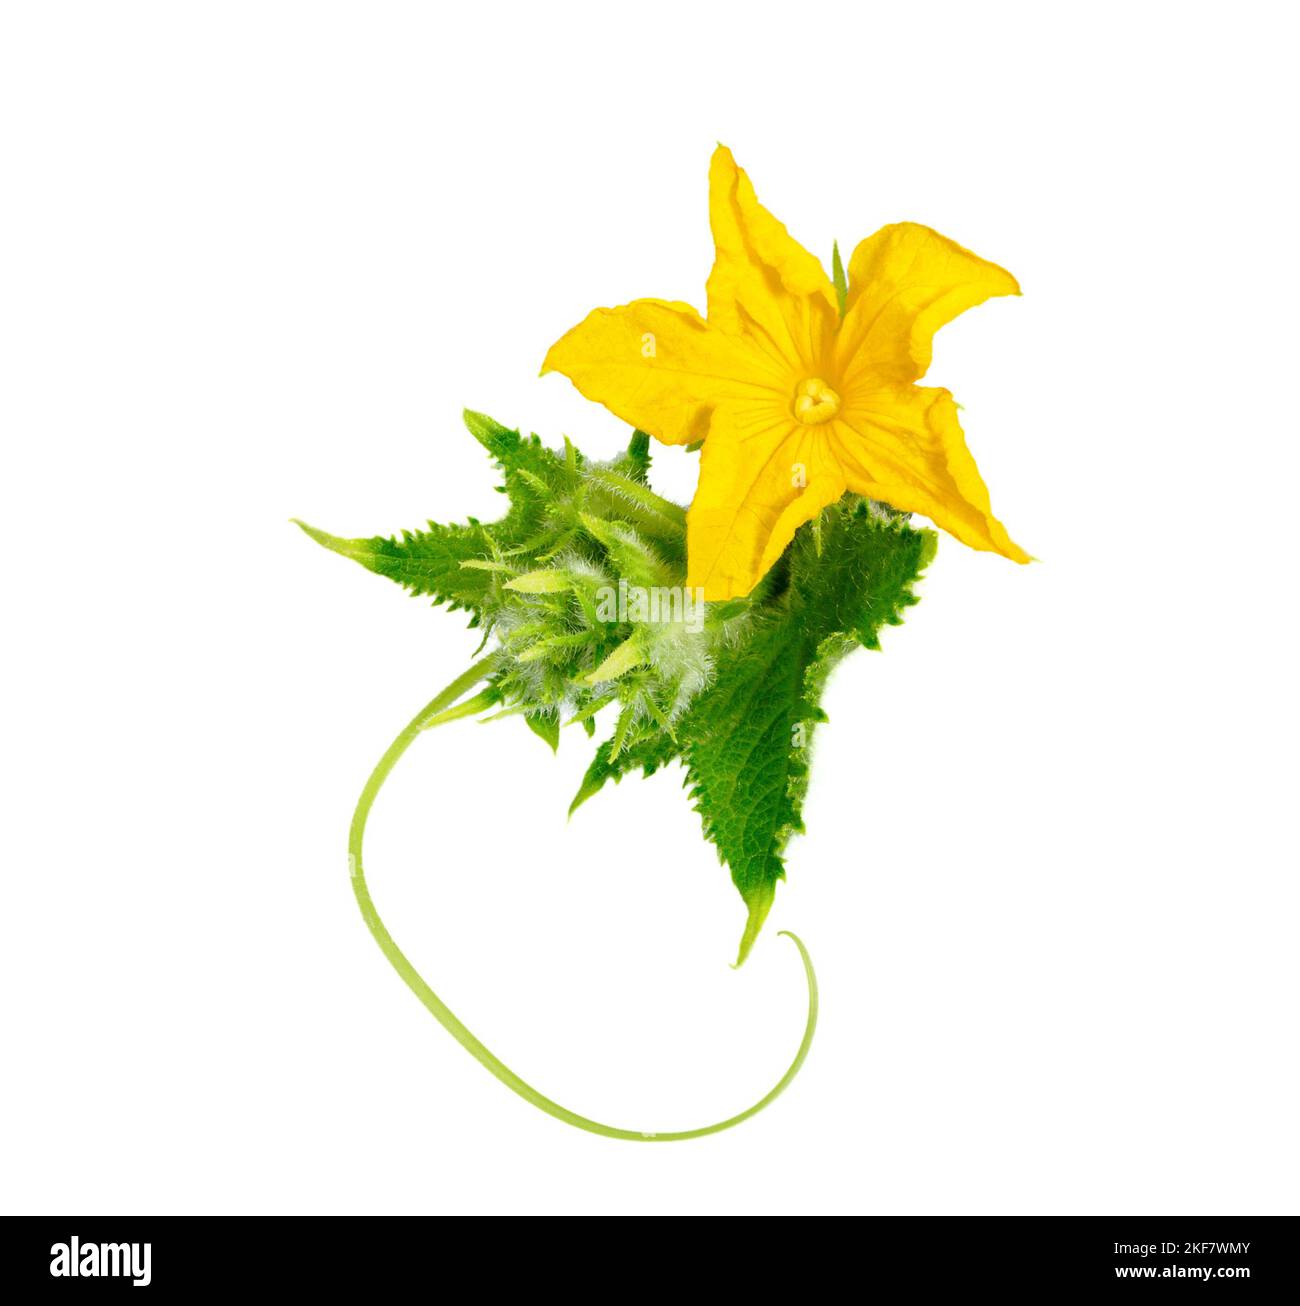 Cucumber flower with leaf isolated on white background. Stock Photo